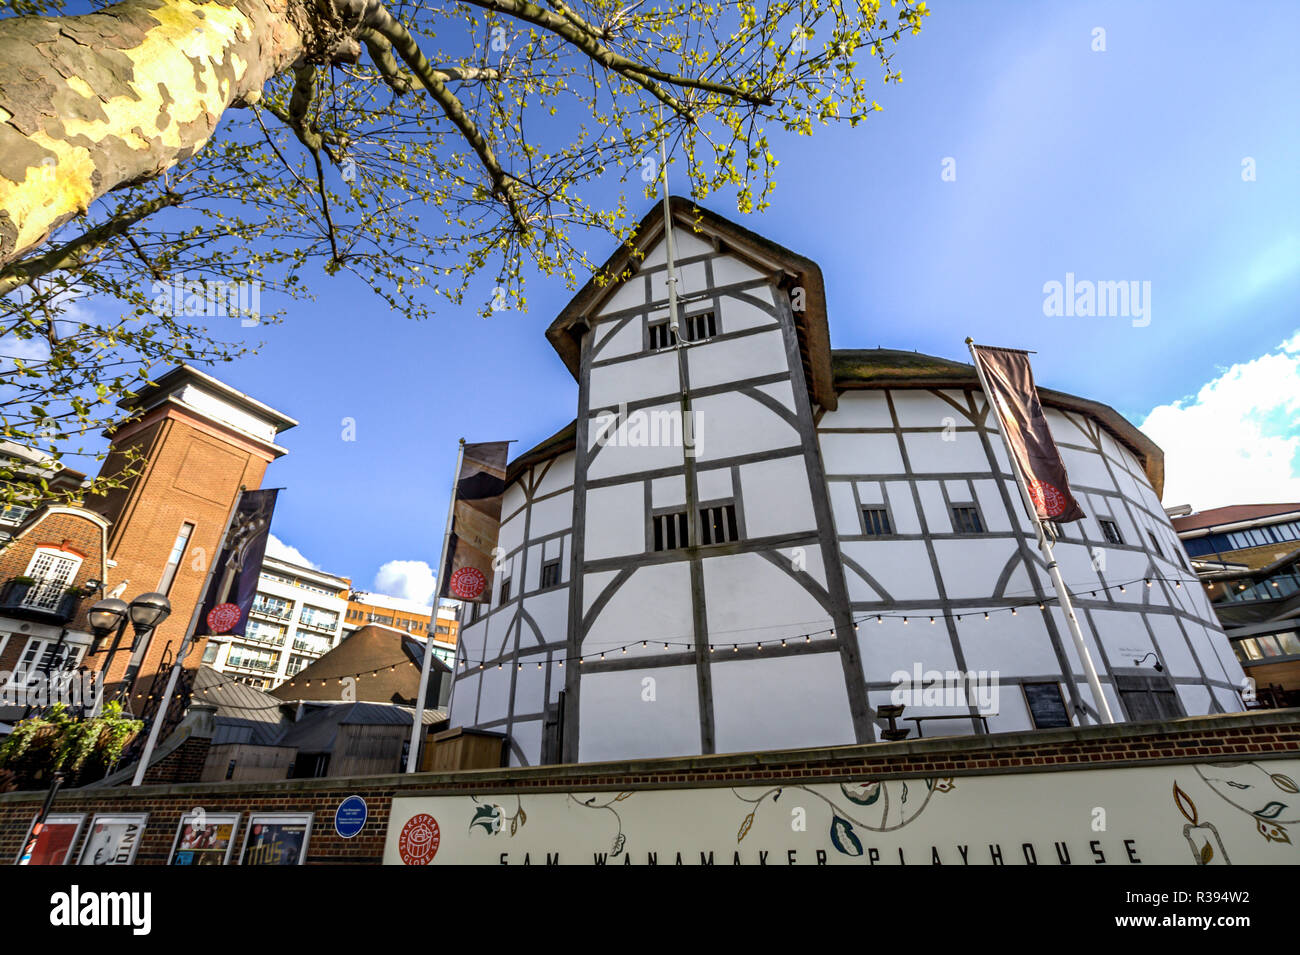 The Globe Theatre, the London Borough of Southwark, on the south bank of River Thames, London, UK. 19.04.2014 Stock Photo